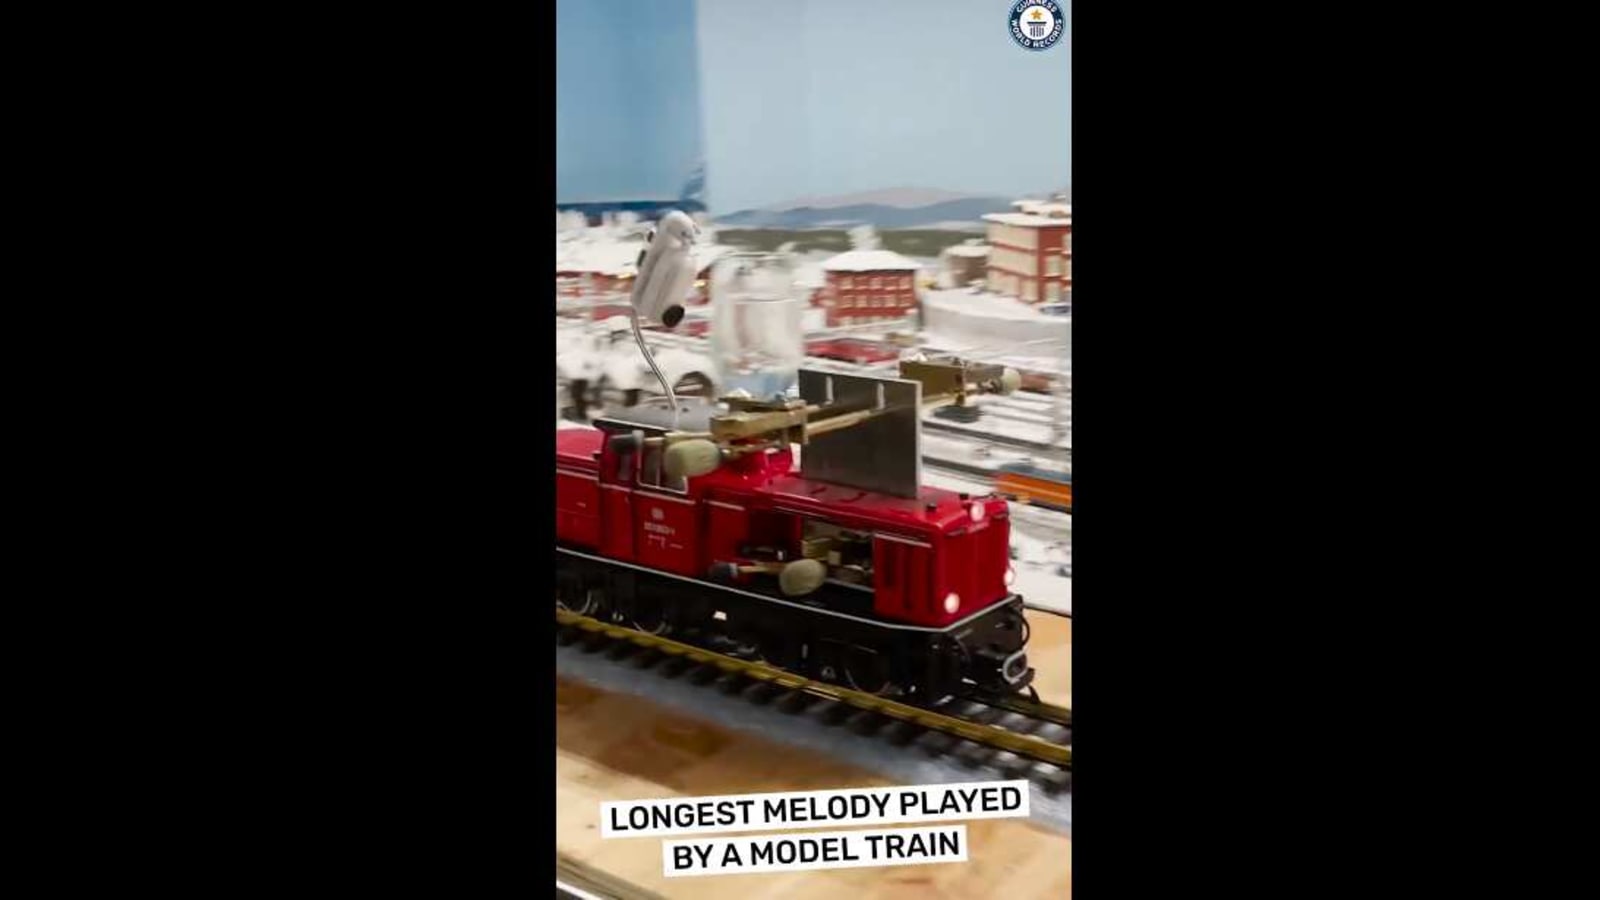 This Viral Video Of Longest Melody Played By A Model Train Will Leave